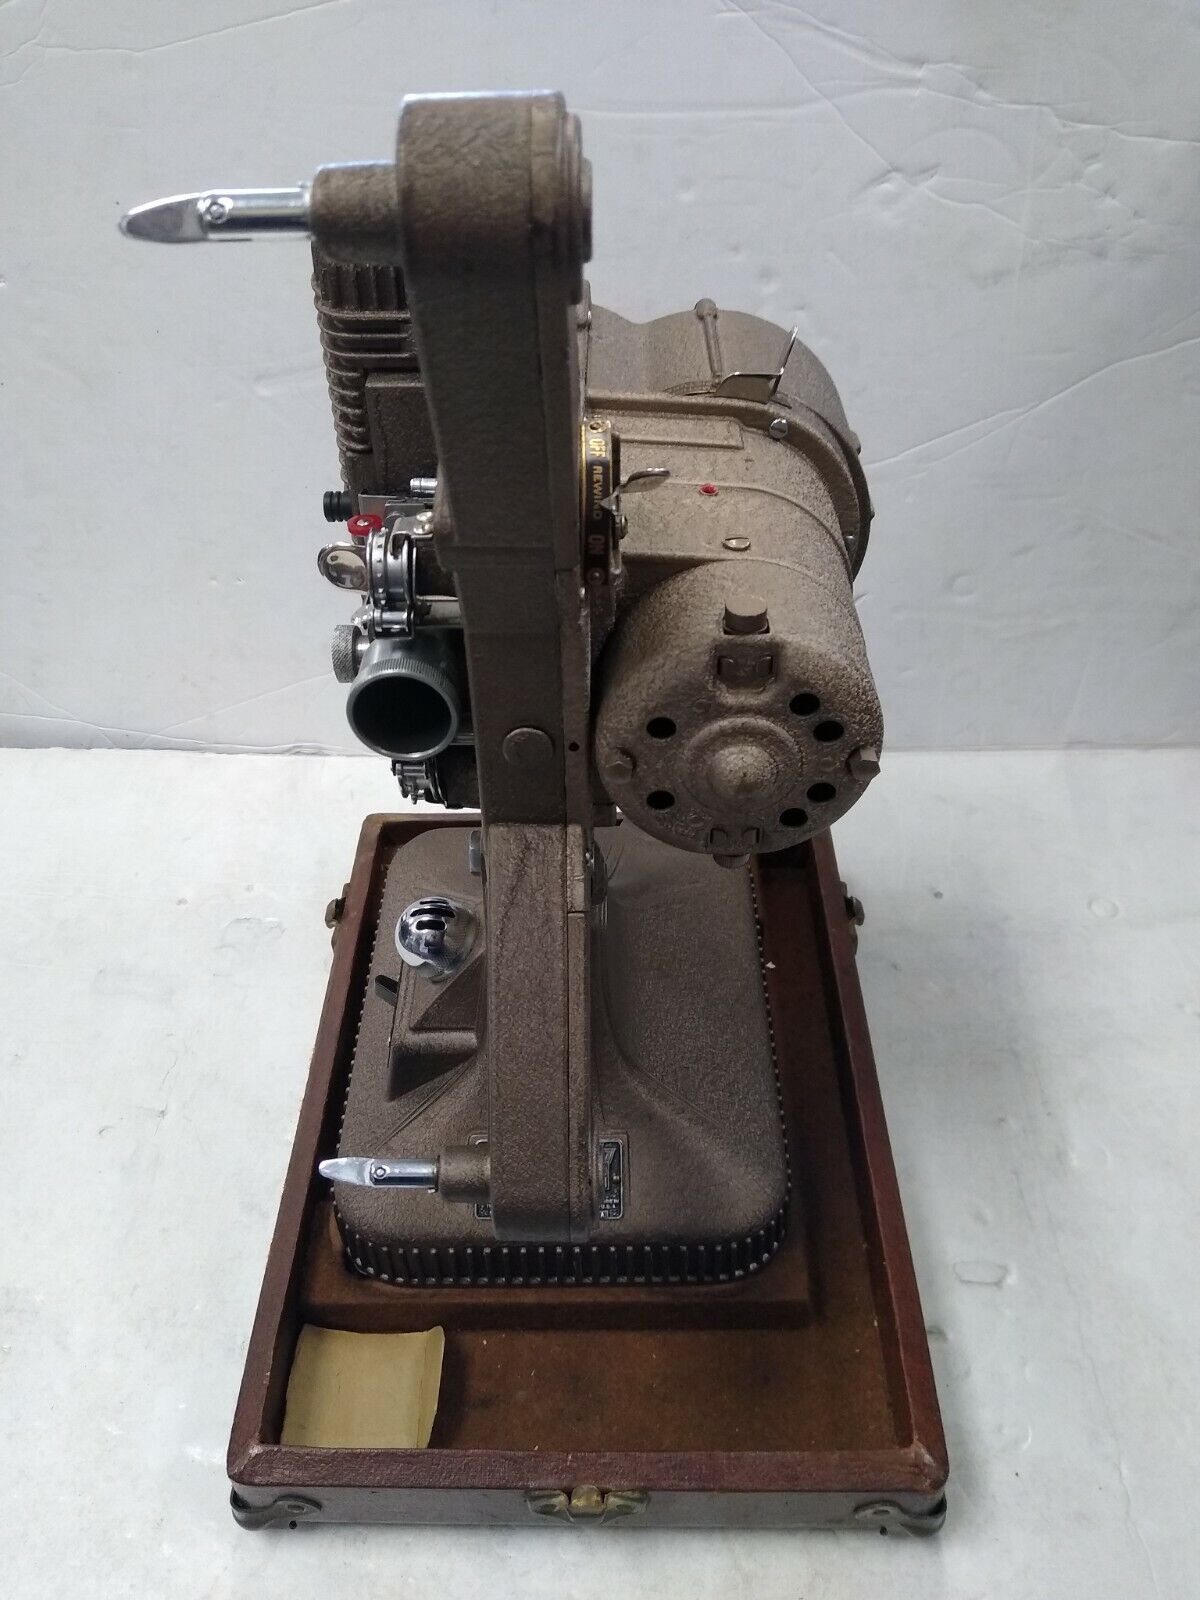 Vintage Keystone 8mm Movie Projector Model K-108 With Hard Carrying Case 